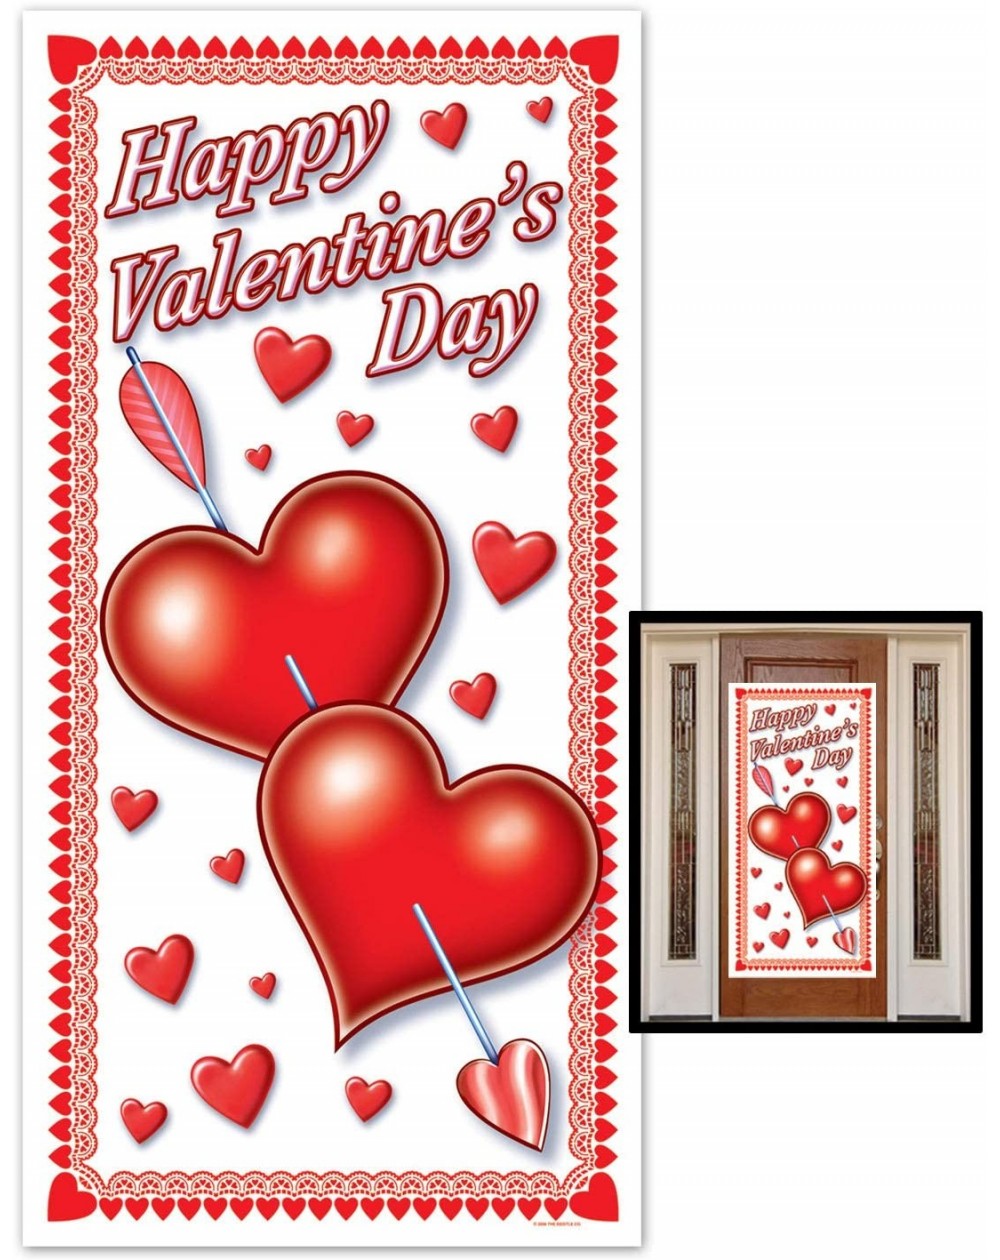 Streamers Happy Valentine's Day Door Cover- 30-Inch by 5-Feet- 1 Per Package - CO116VLMDNV $7.71